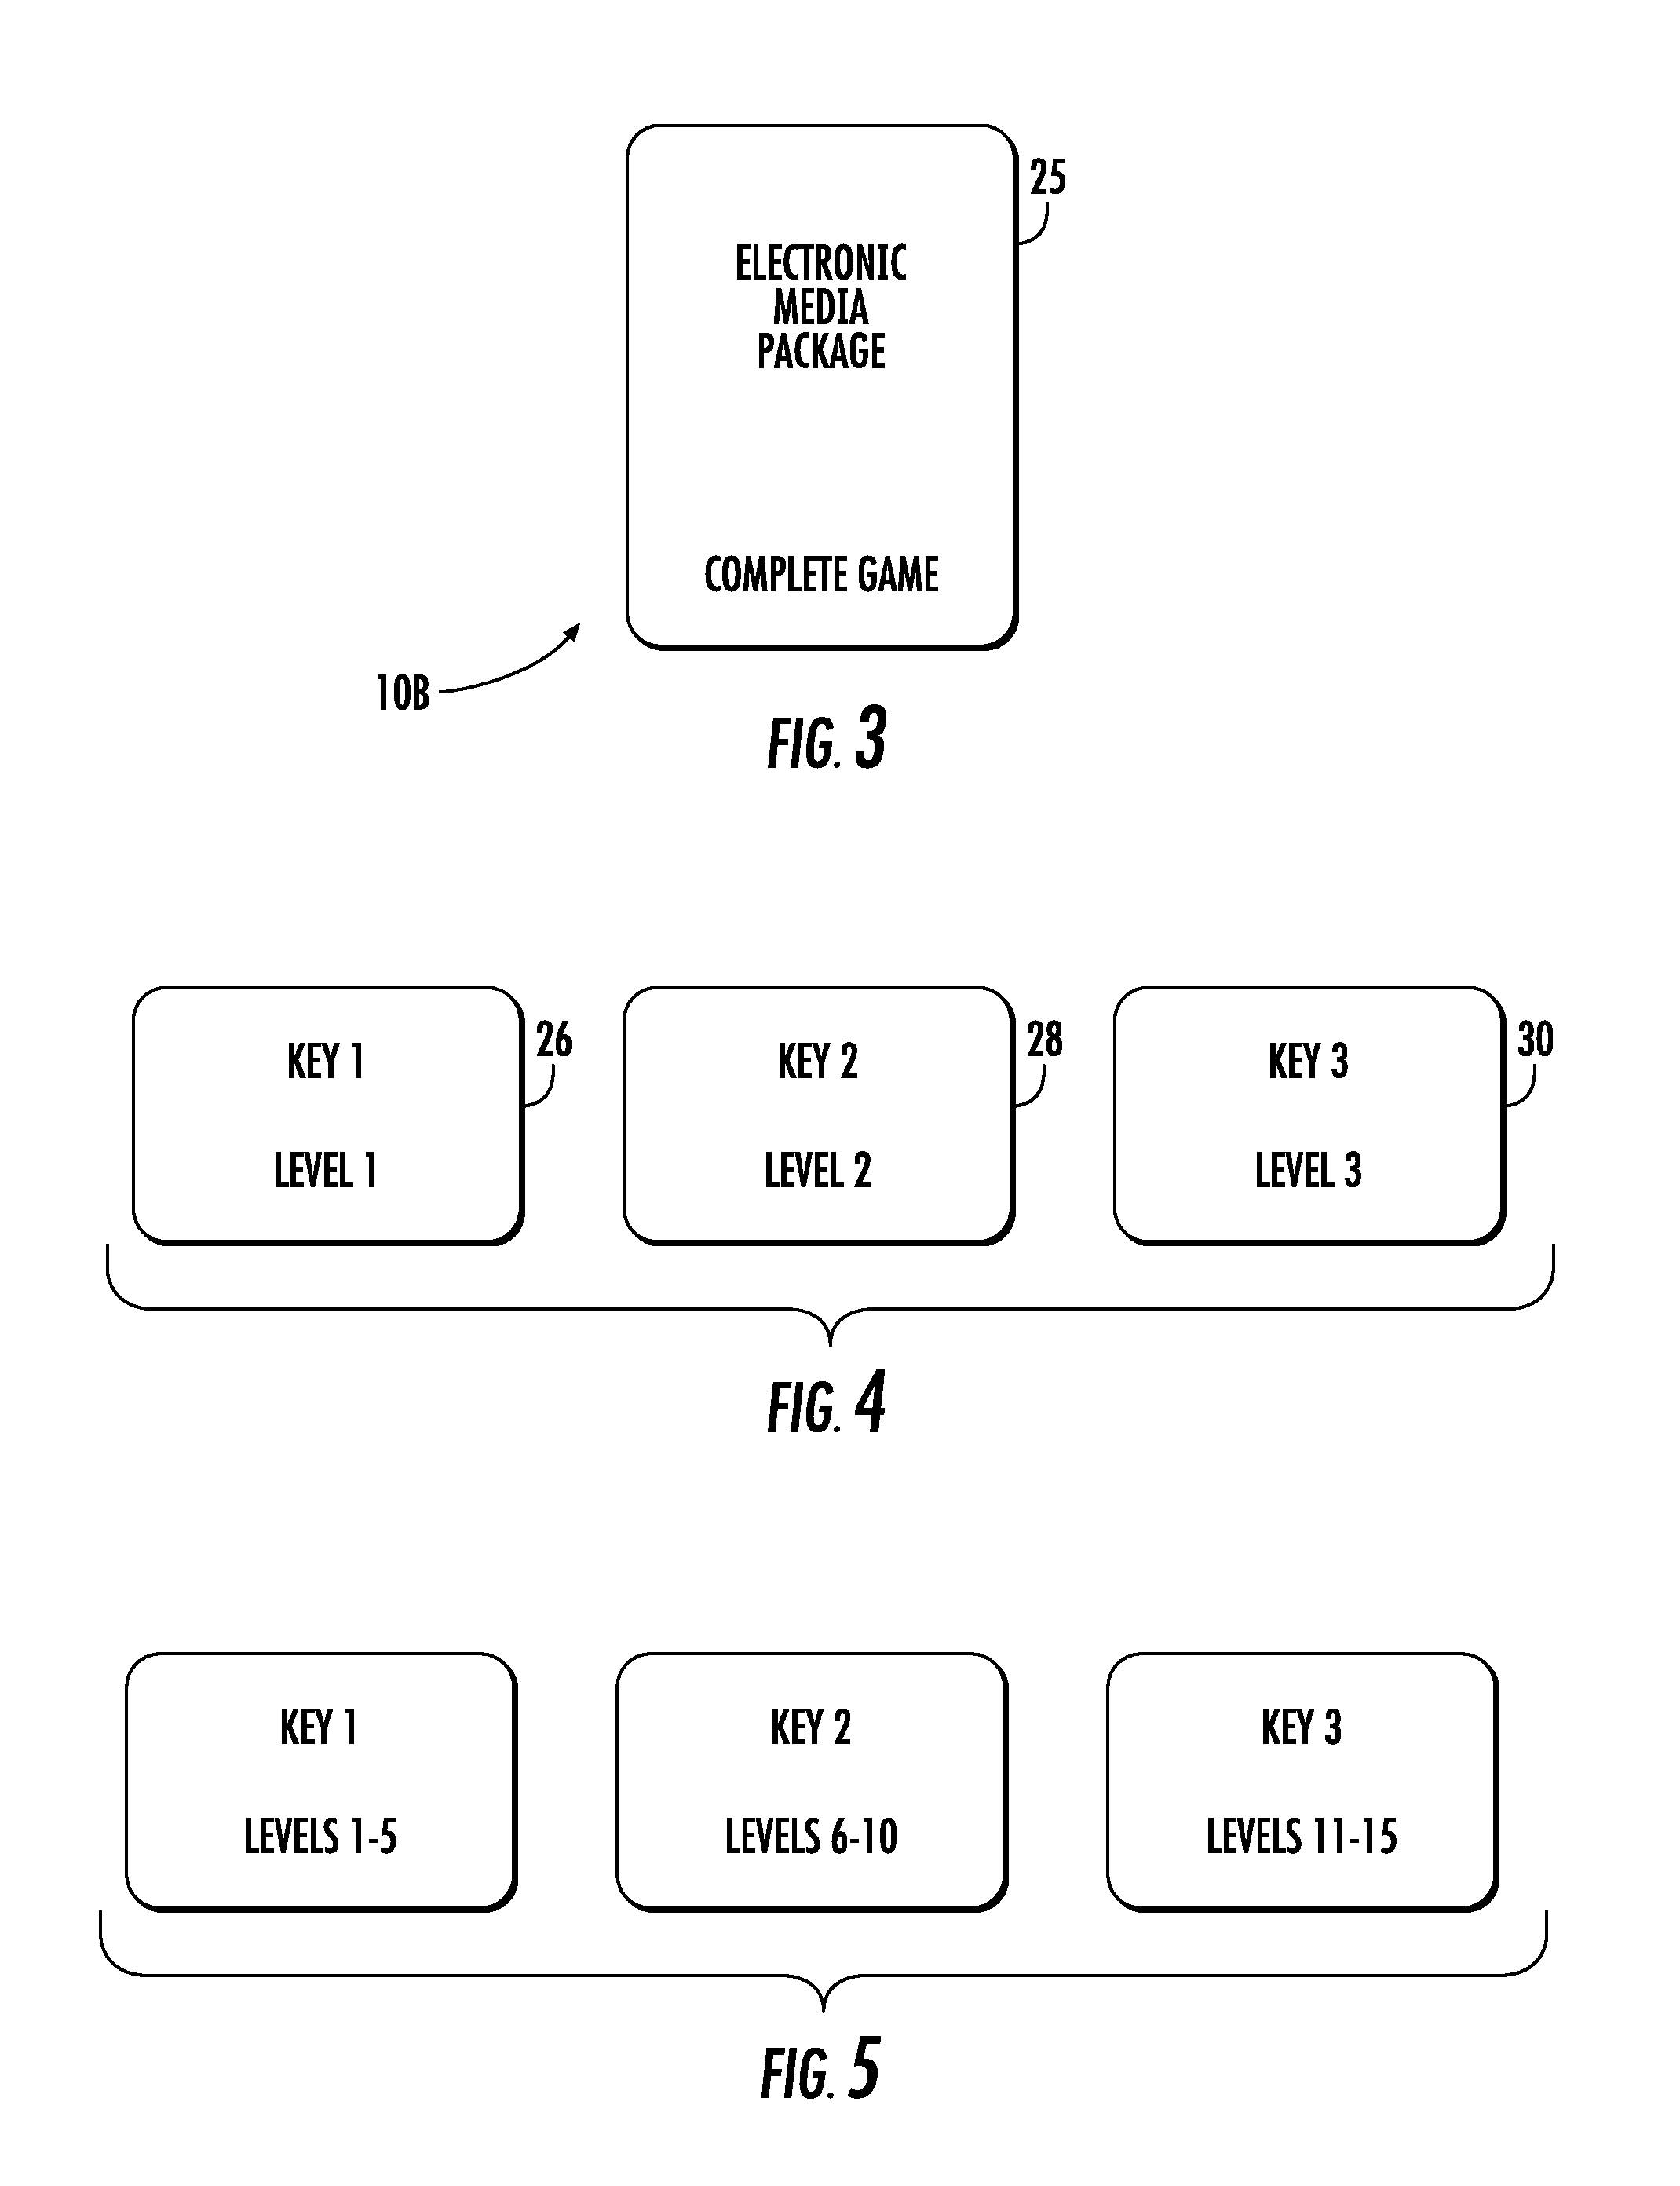 System and method for delivering electronic media content on a multi-level basis